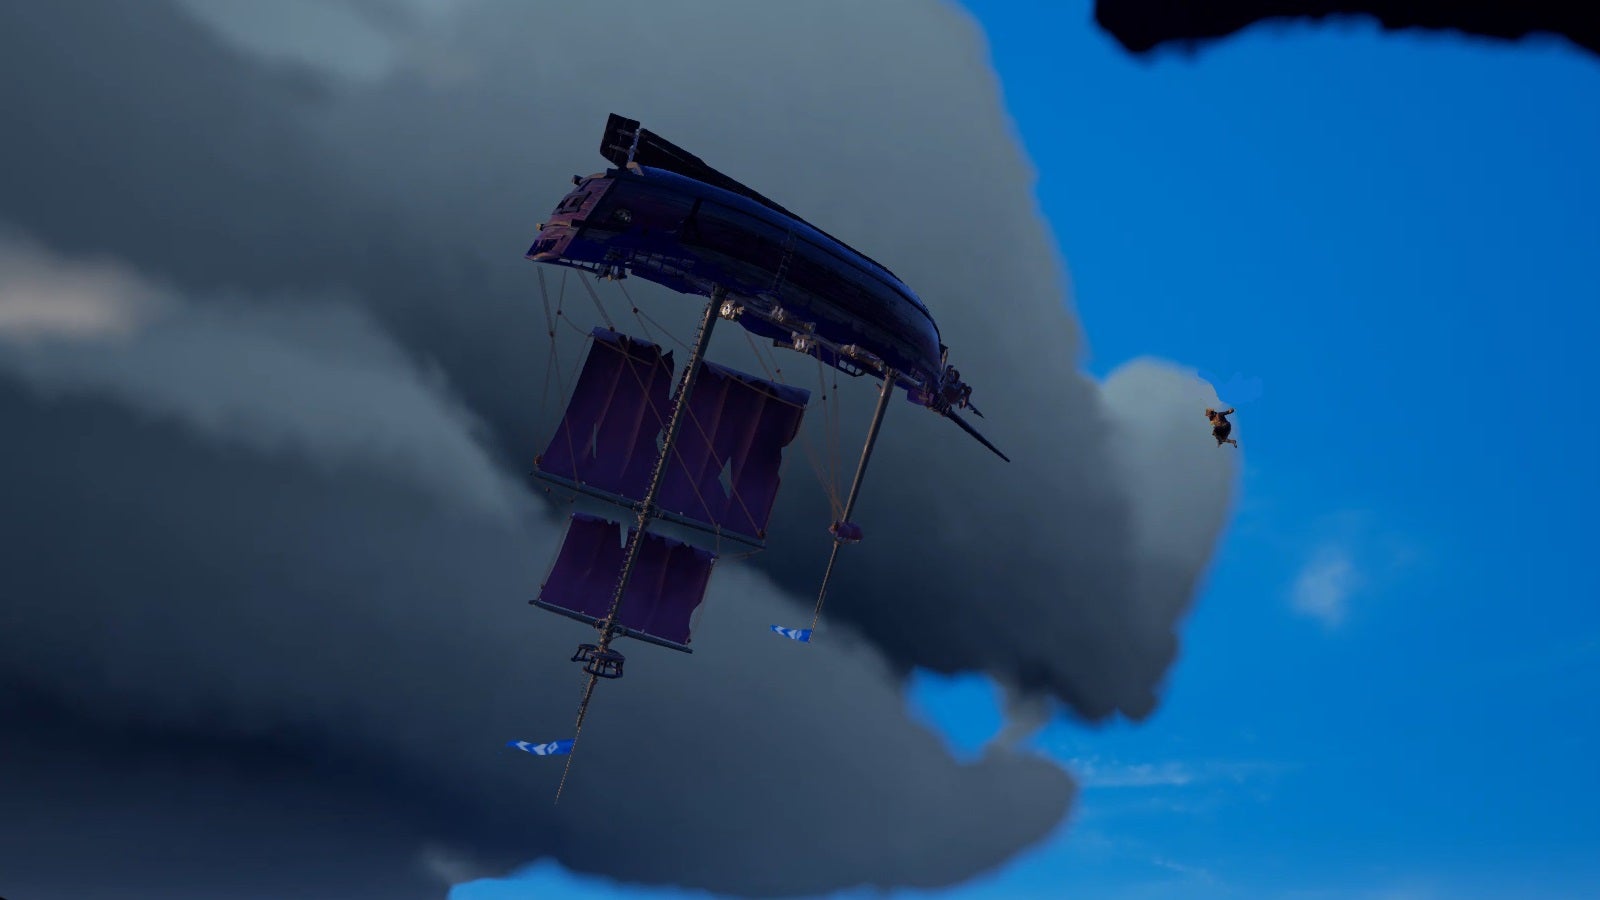 Image for Sea Of Thieves has a great bug that flings ships into the air, so I rated their techniques